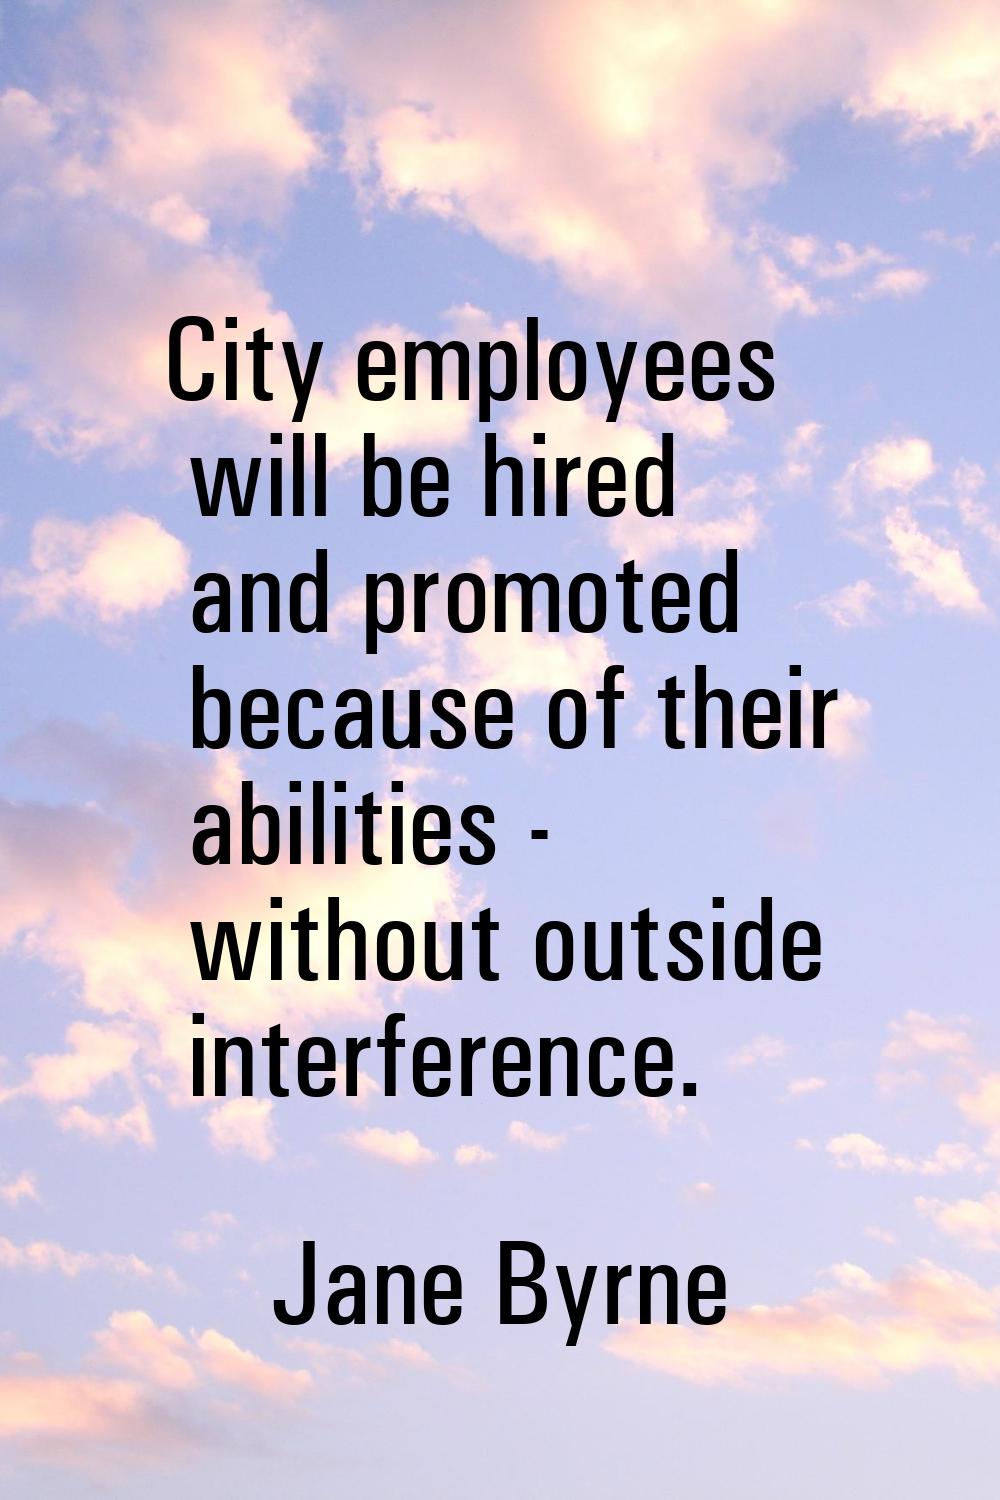 City employees will be hired and promoted because of their abilities - without outside interference